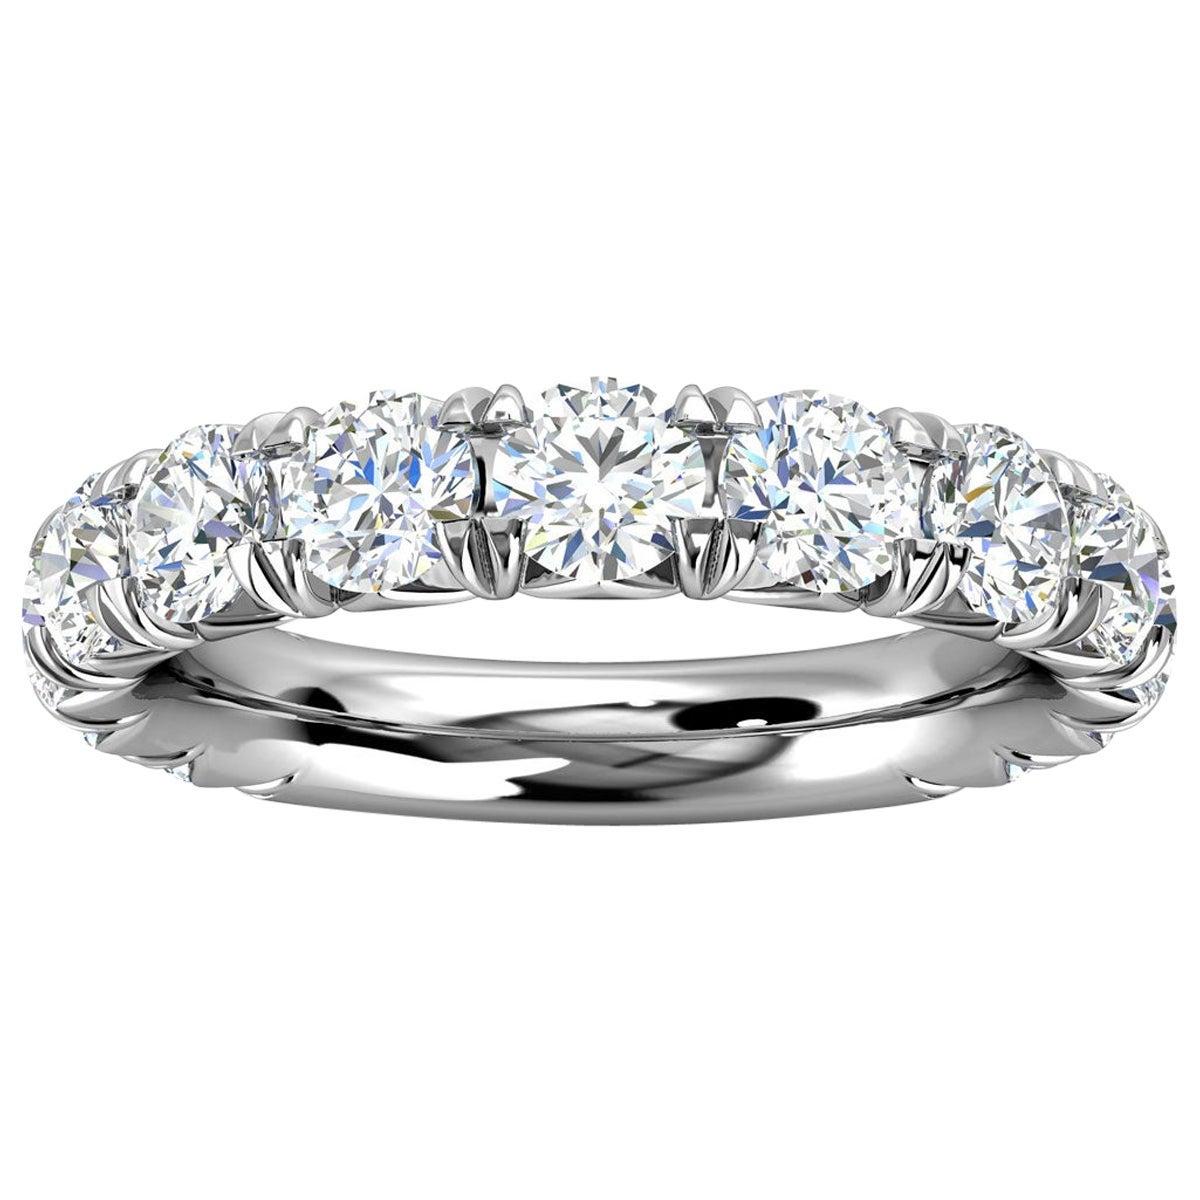 For Sale:  18k White Gold GIA French Pave Diamond Ring '2 Ct. Tw'